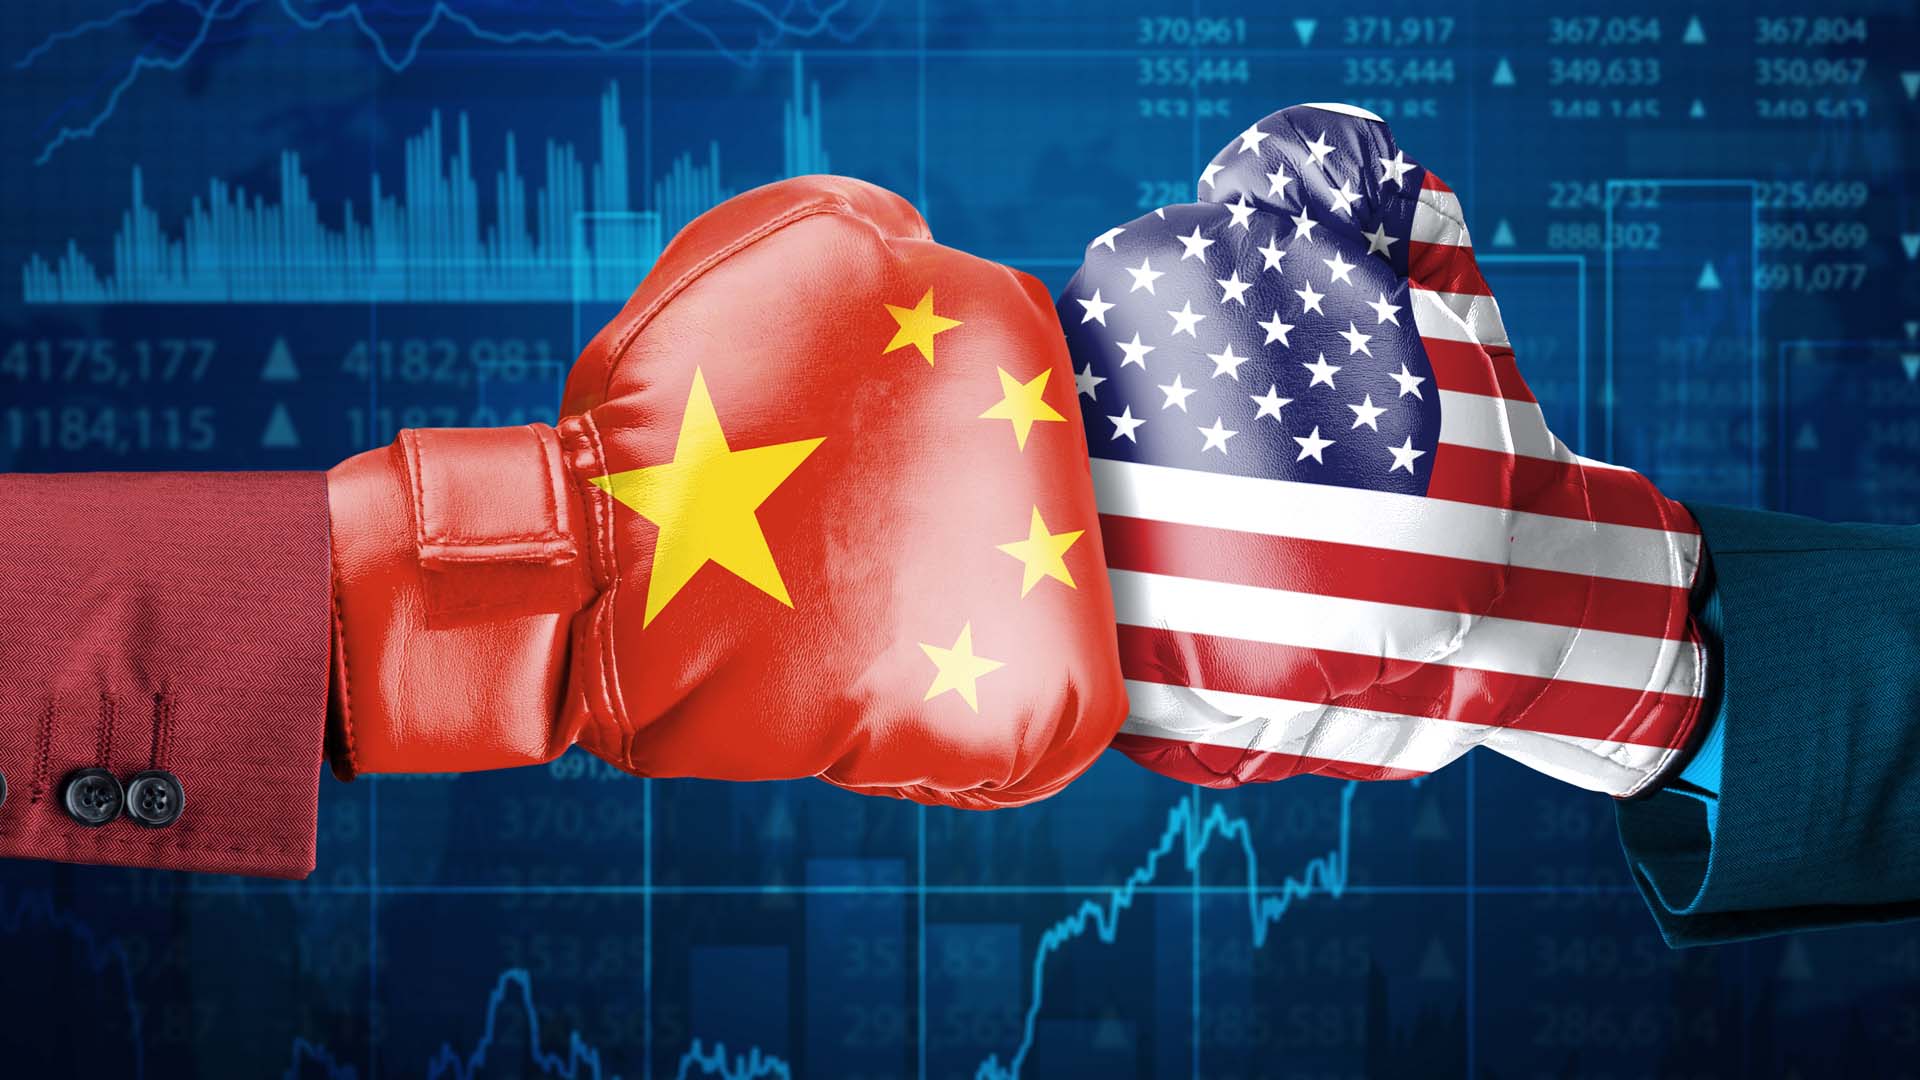 Experts’ Bulletin #4: Strategic Competition: US-China Relations Following COVID-19